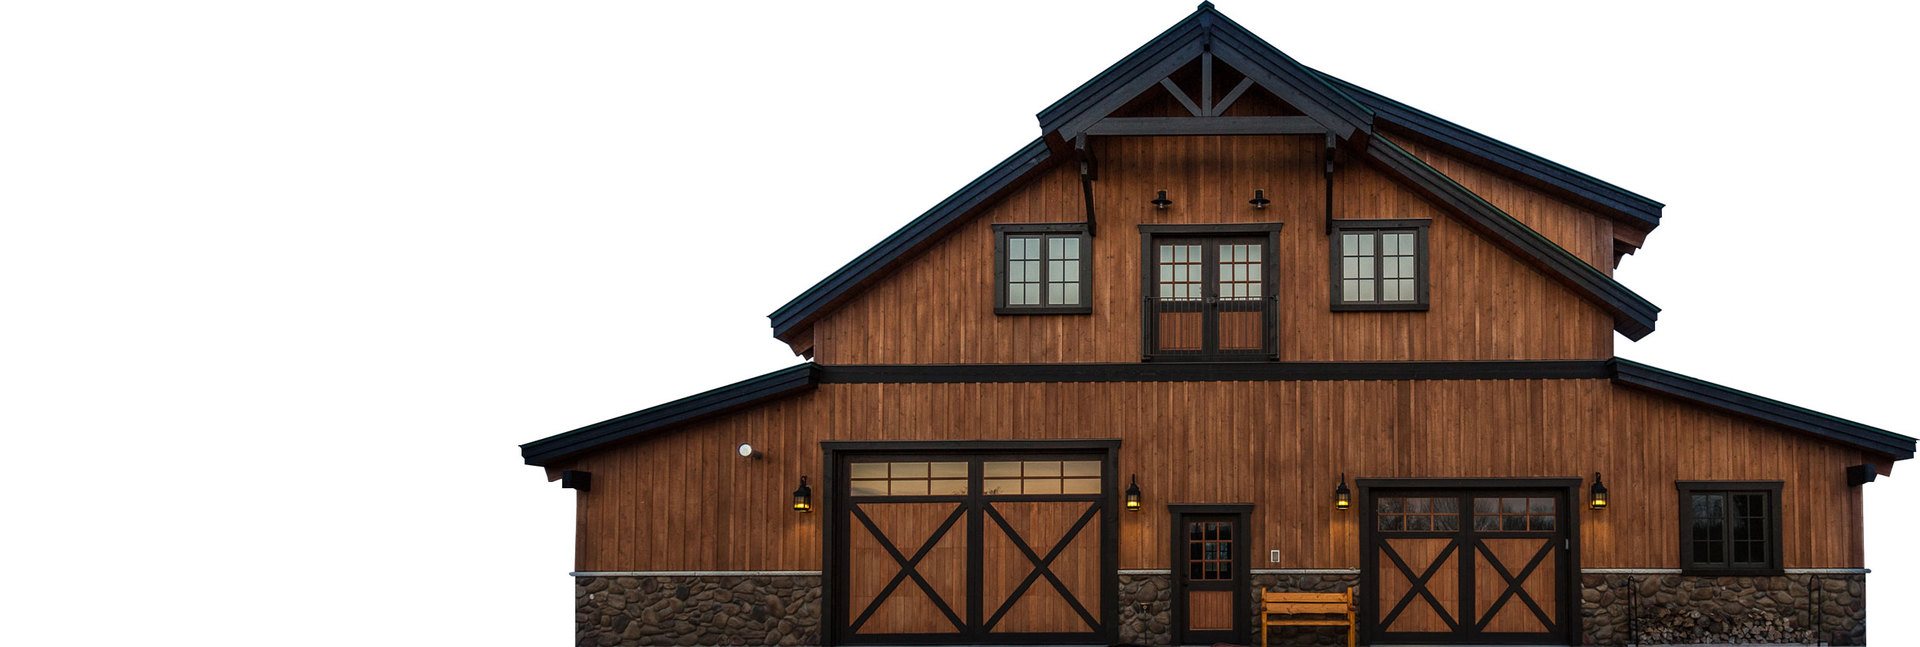 DC Builders is a general contracting and design firm specializing in custom workshops and barn homes.